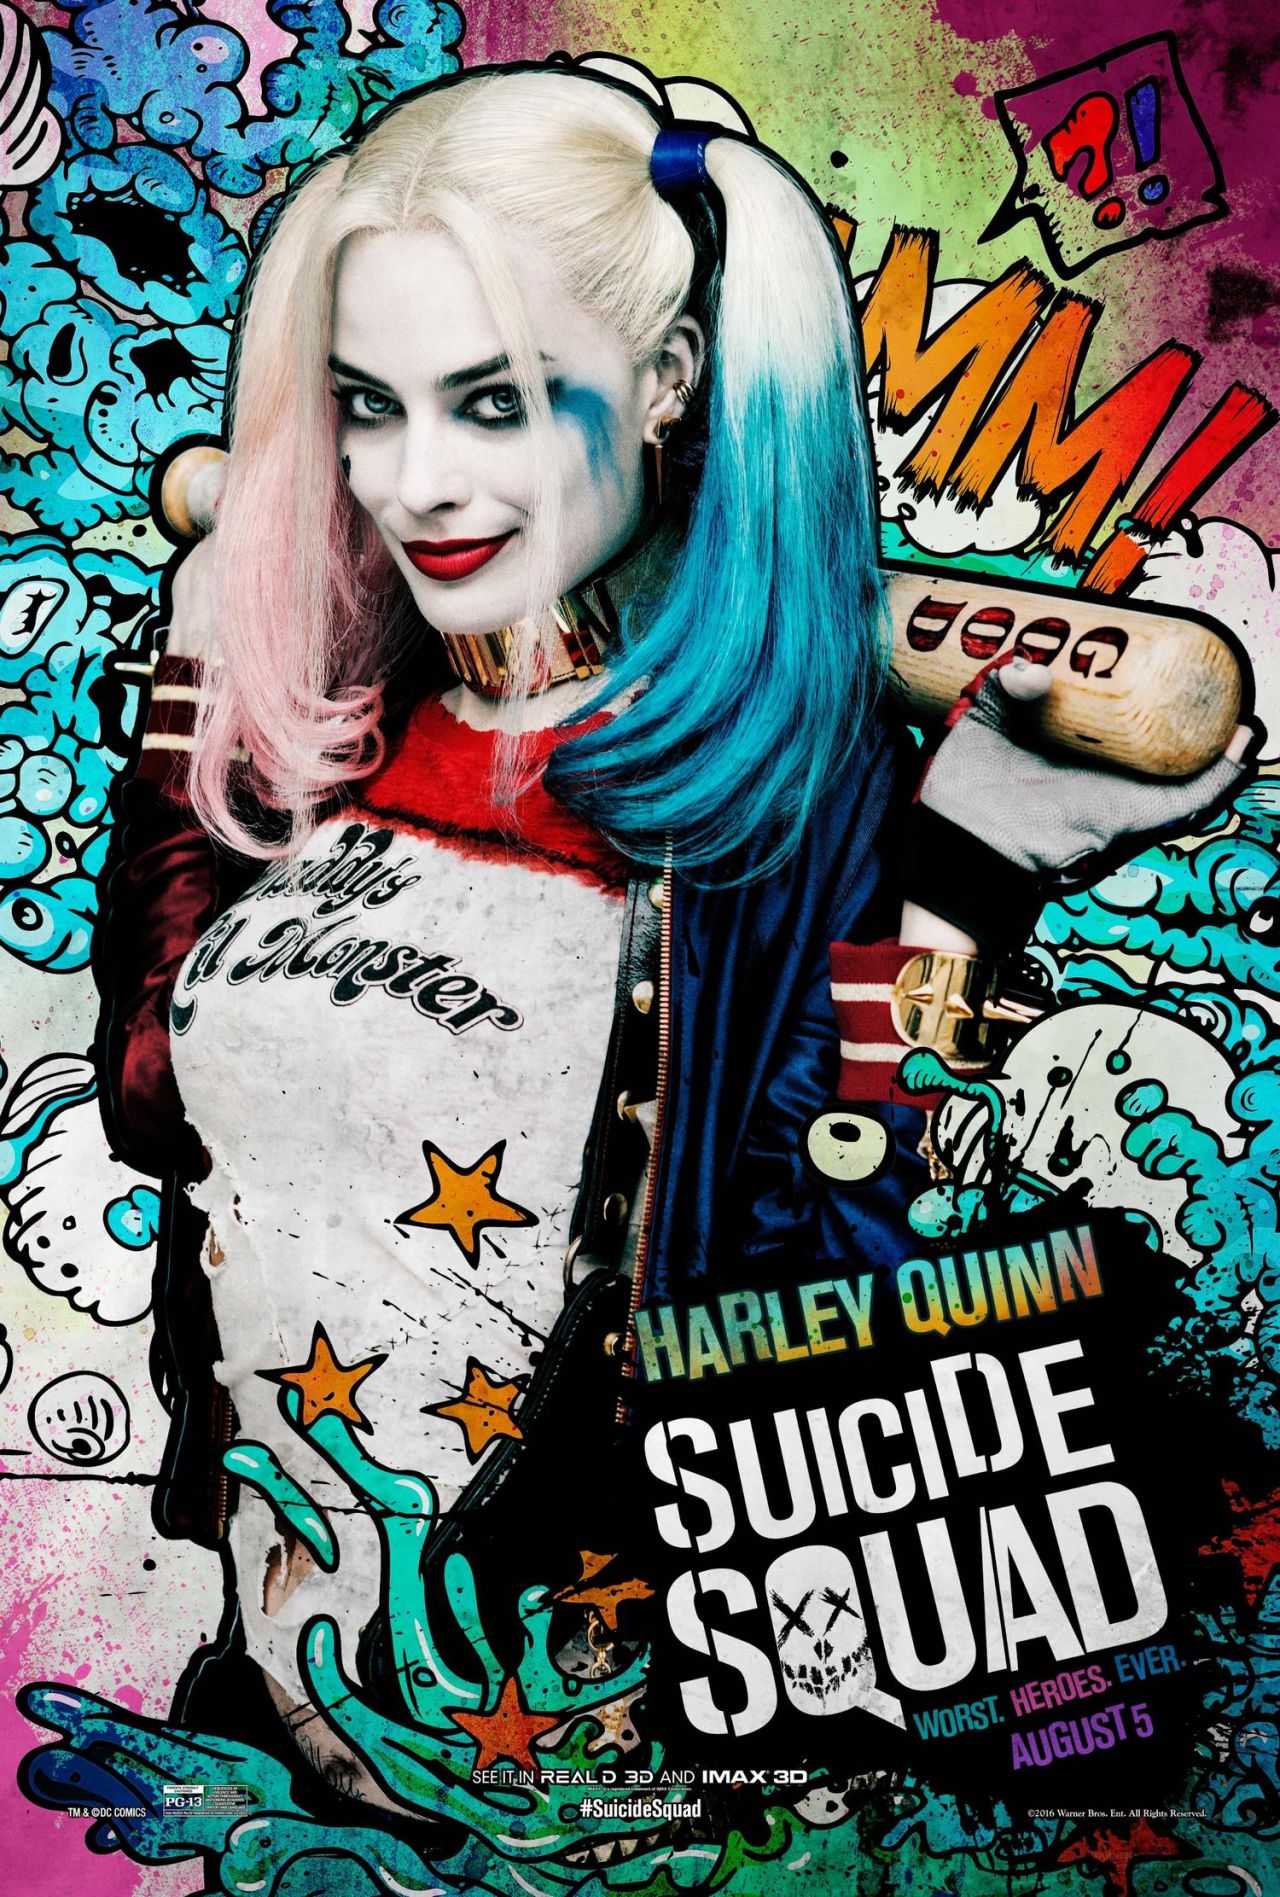 Margot Robbie - Suicide Squad Promo Photos, Posters and Stills